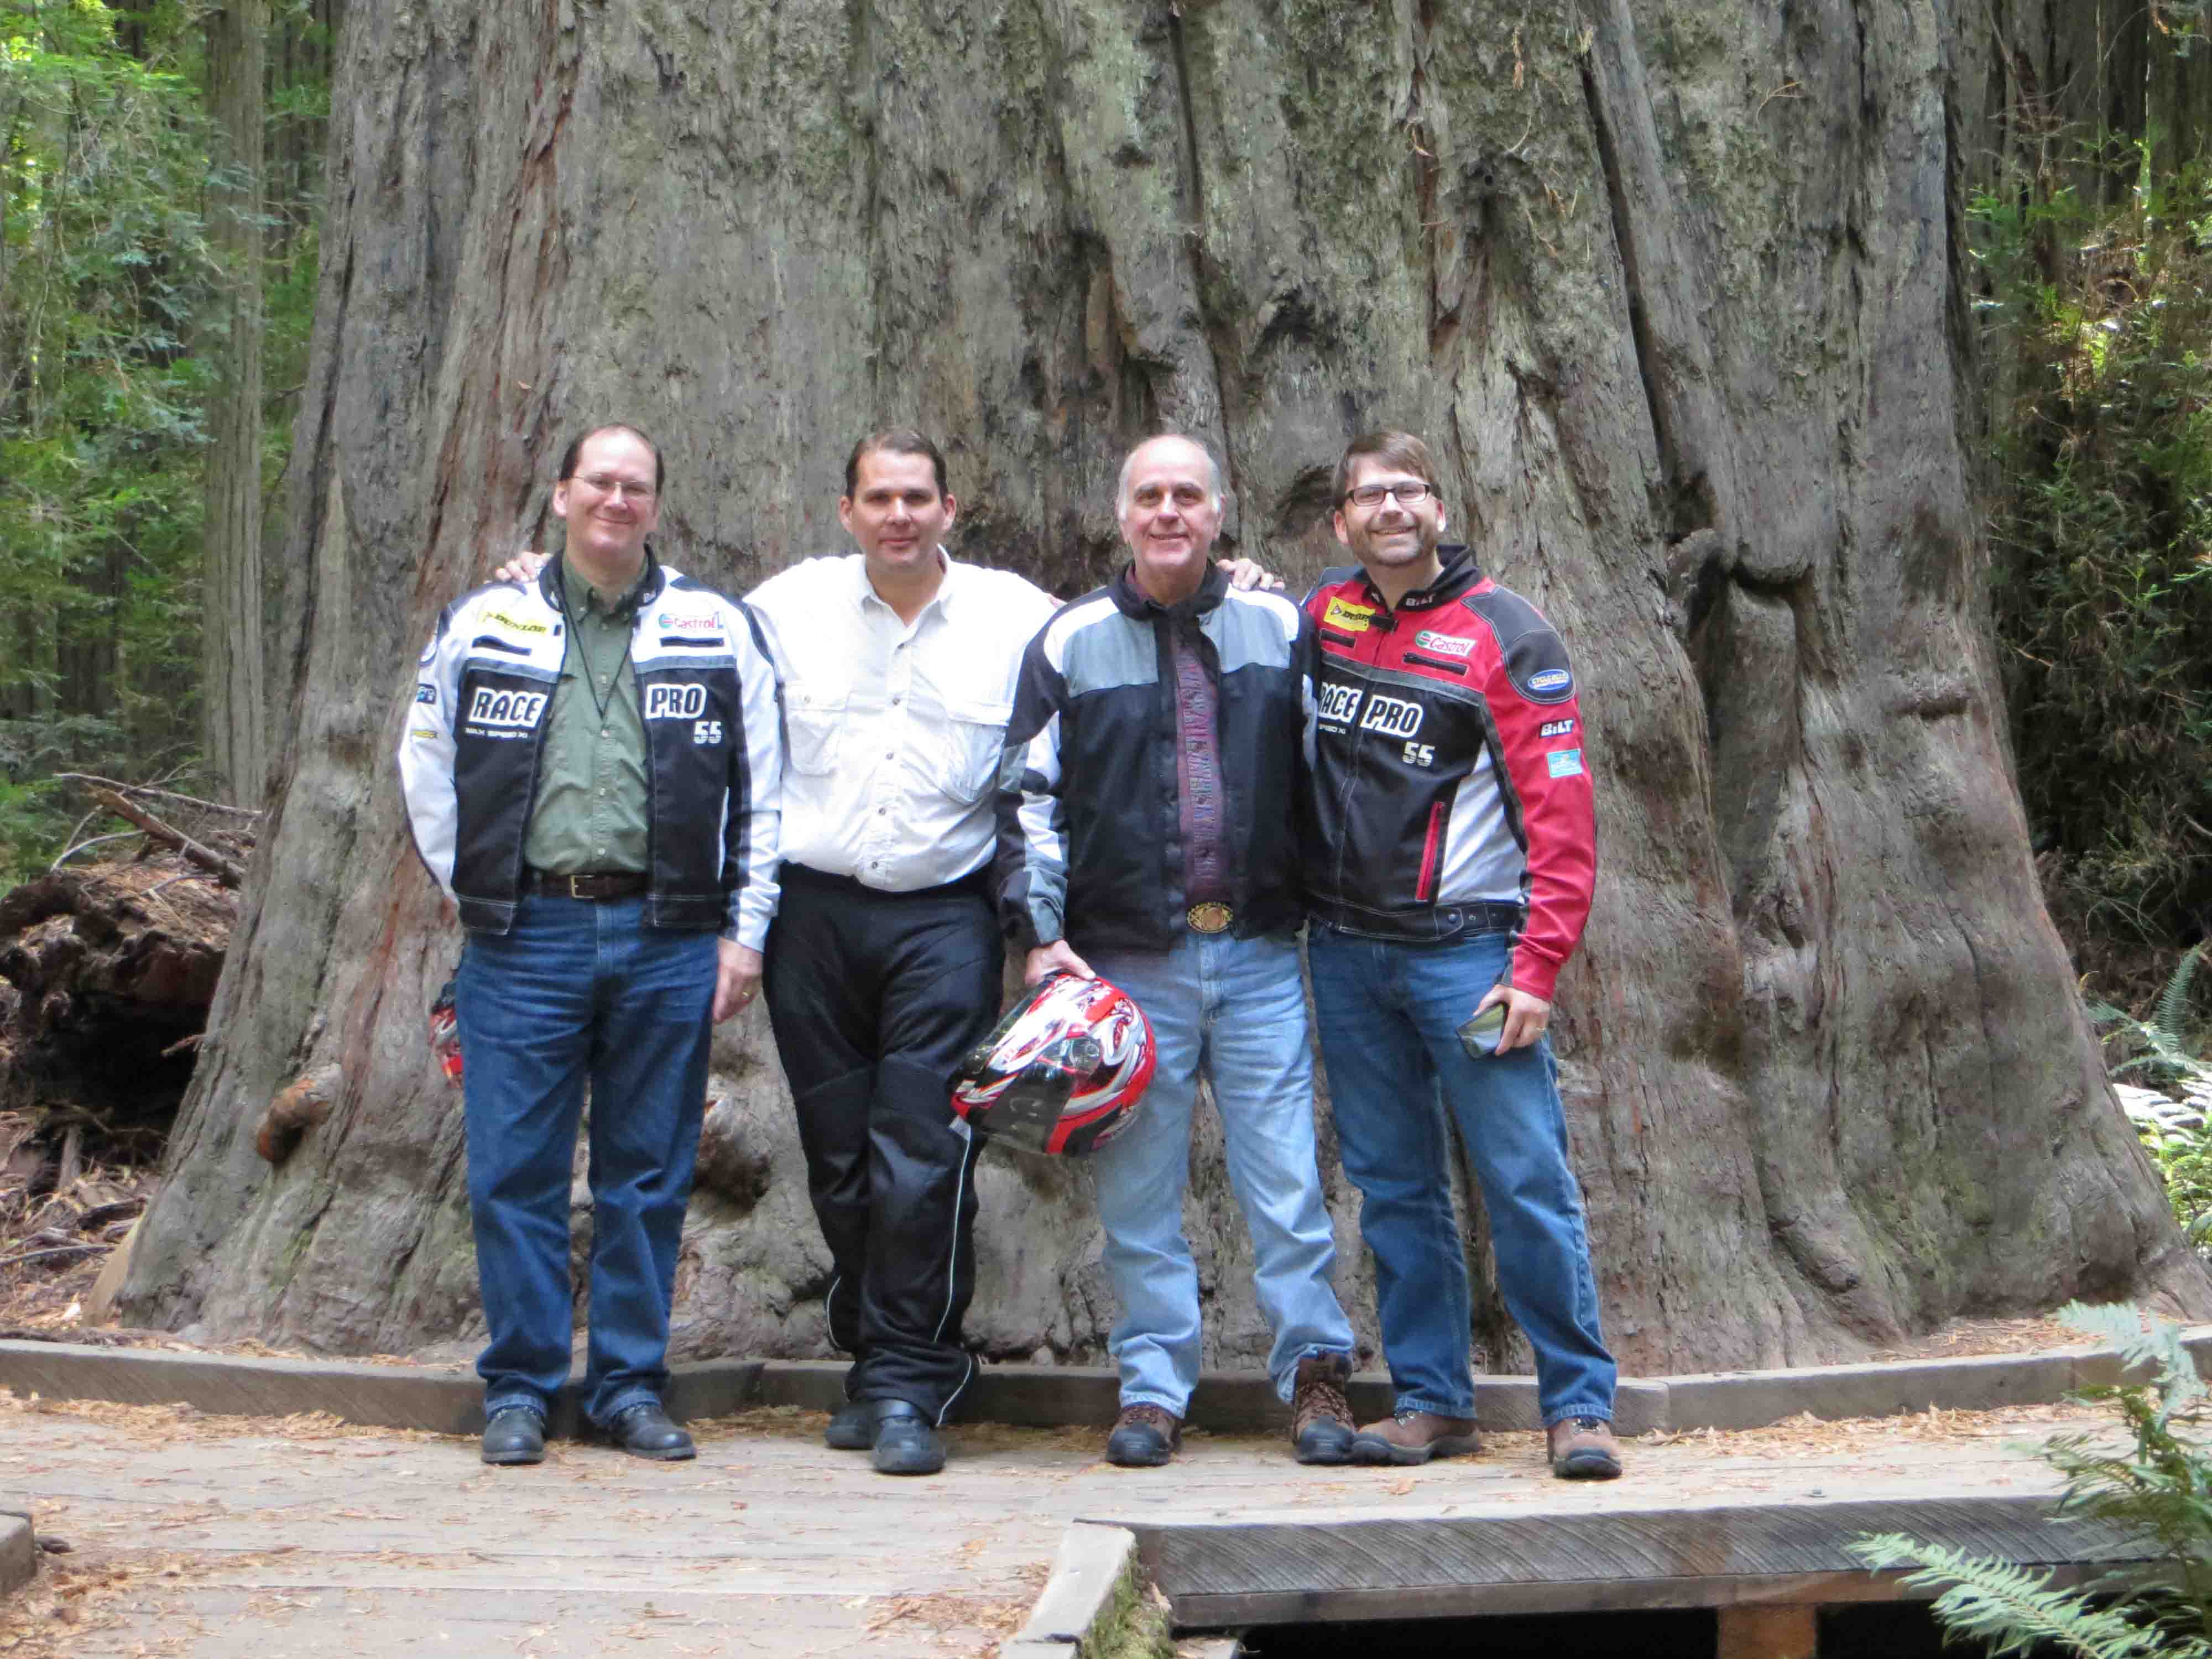 Family in front of giant redwood tree